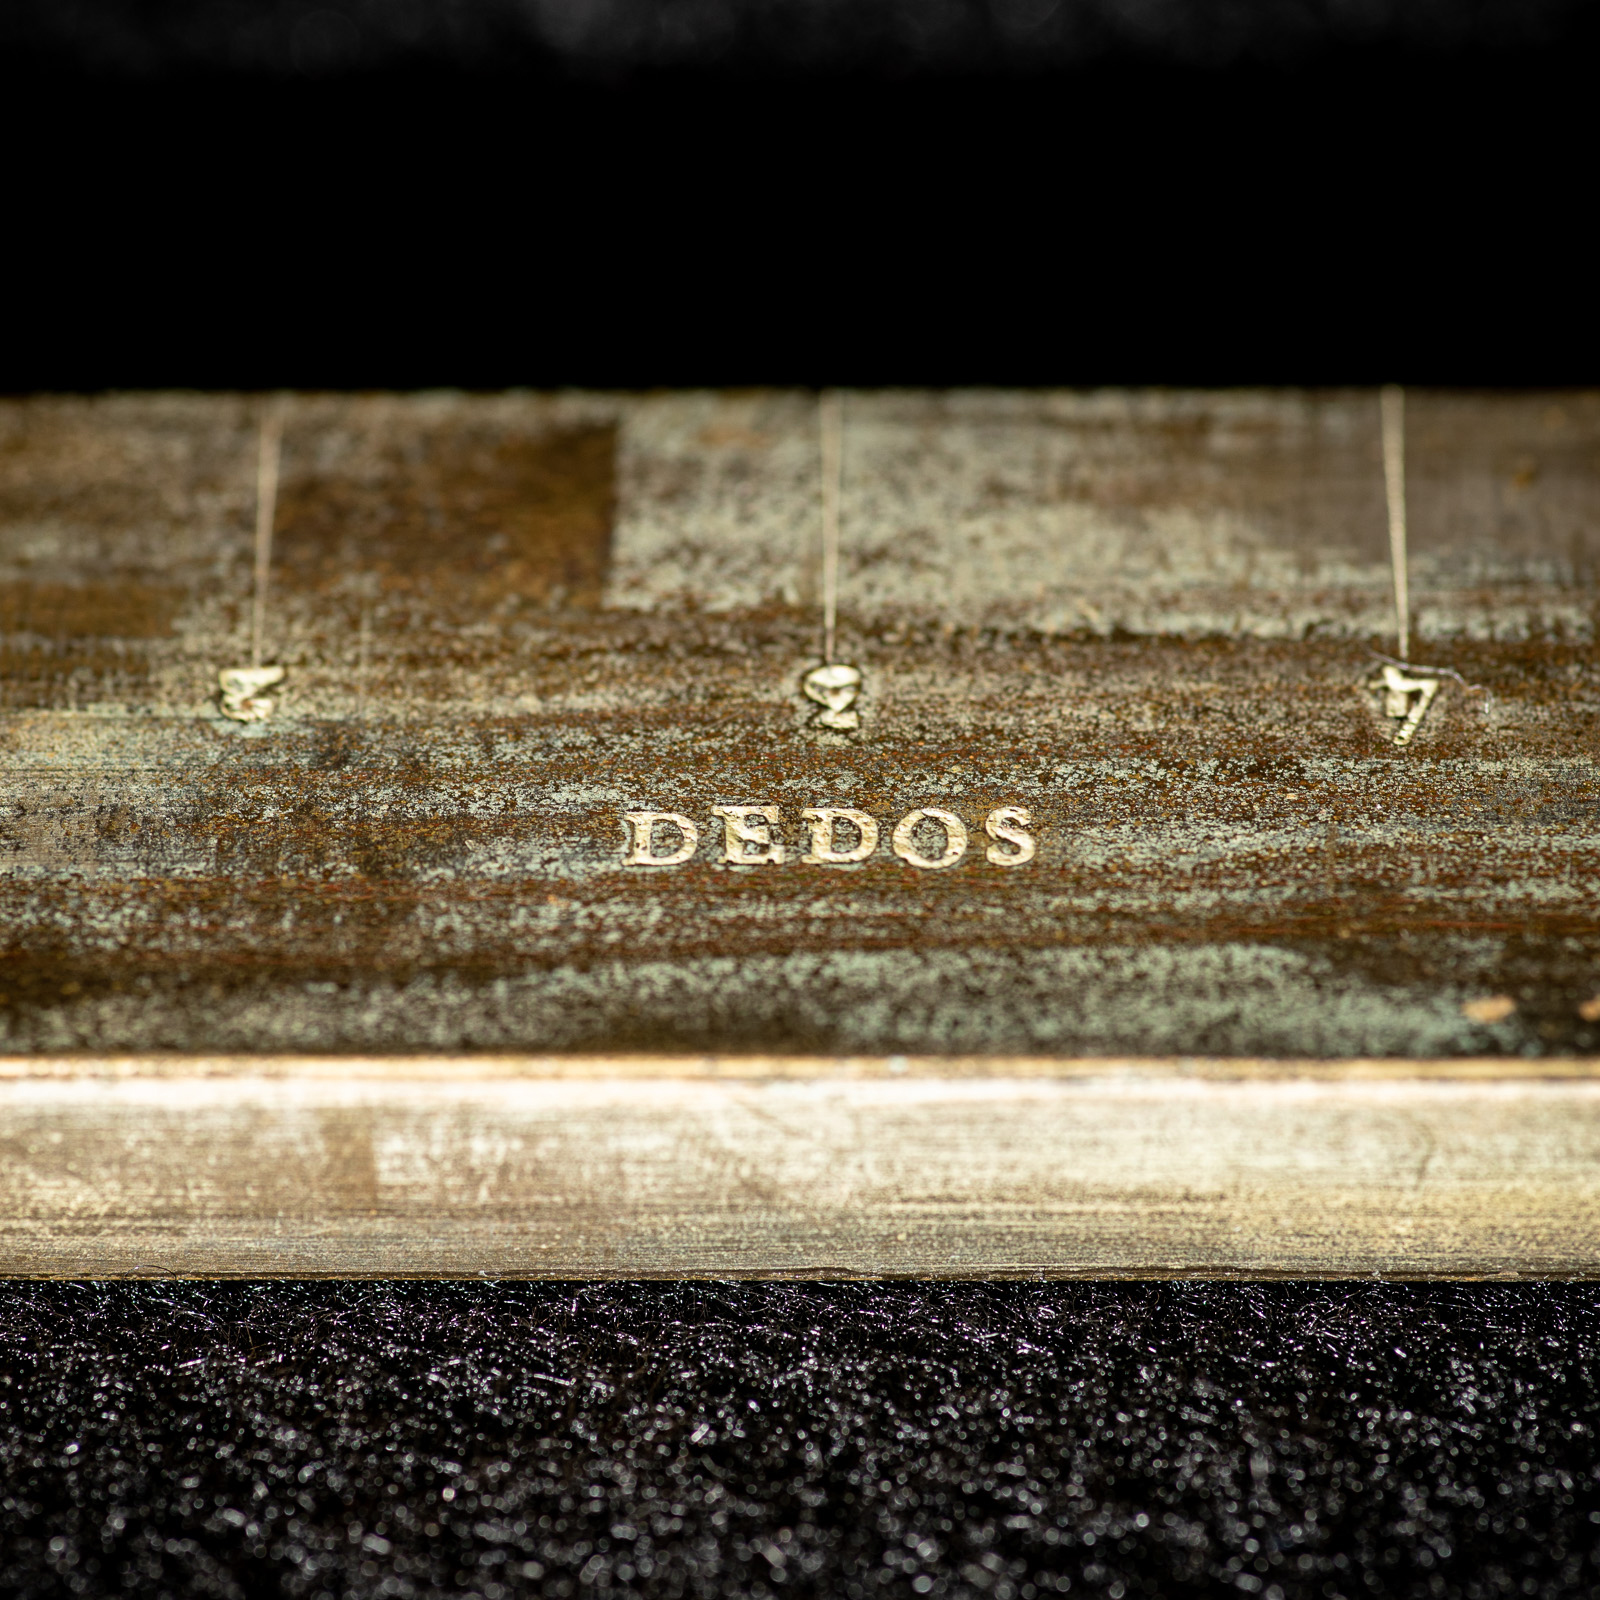 Vara stamped with the word "dedos" with graduations above. 